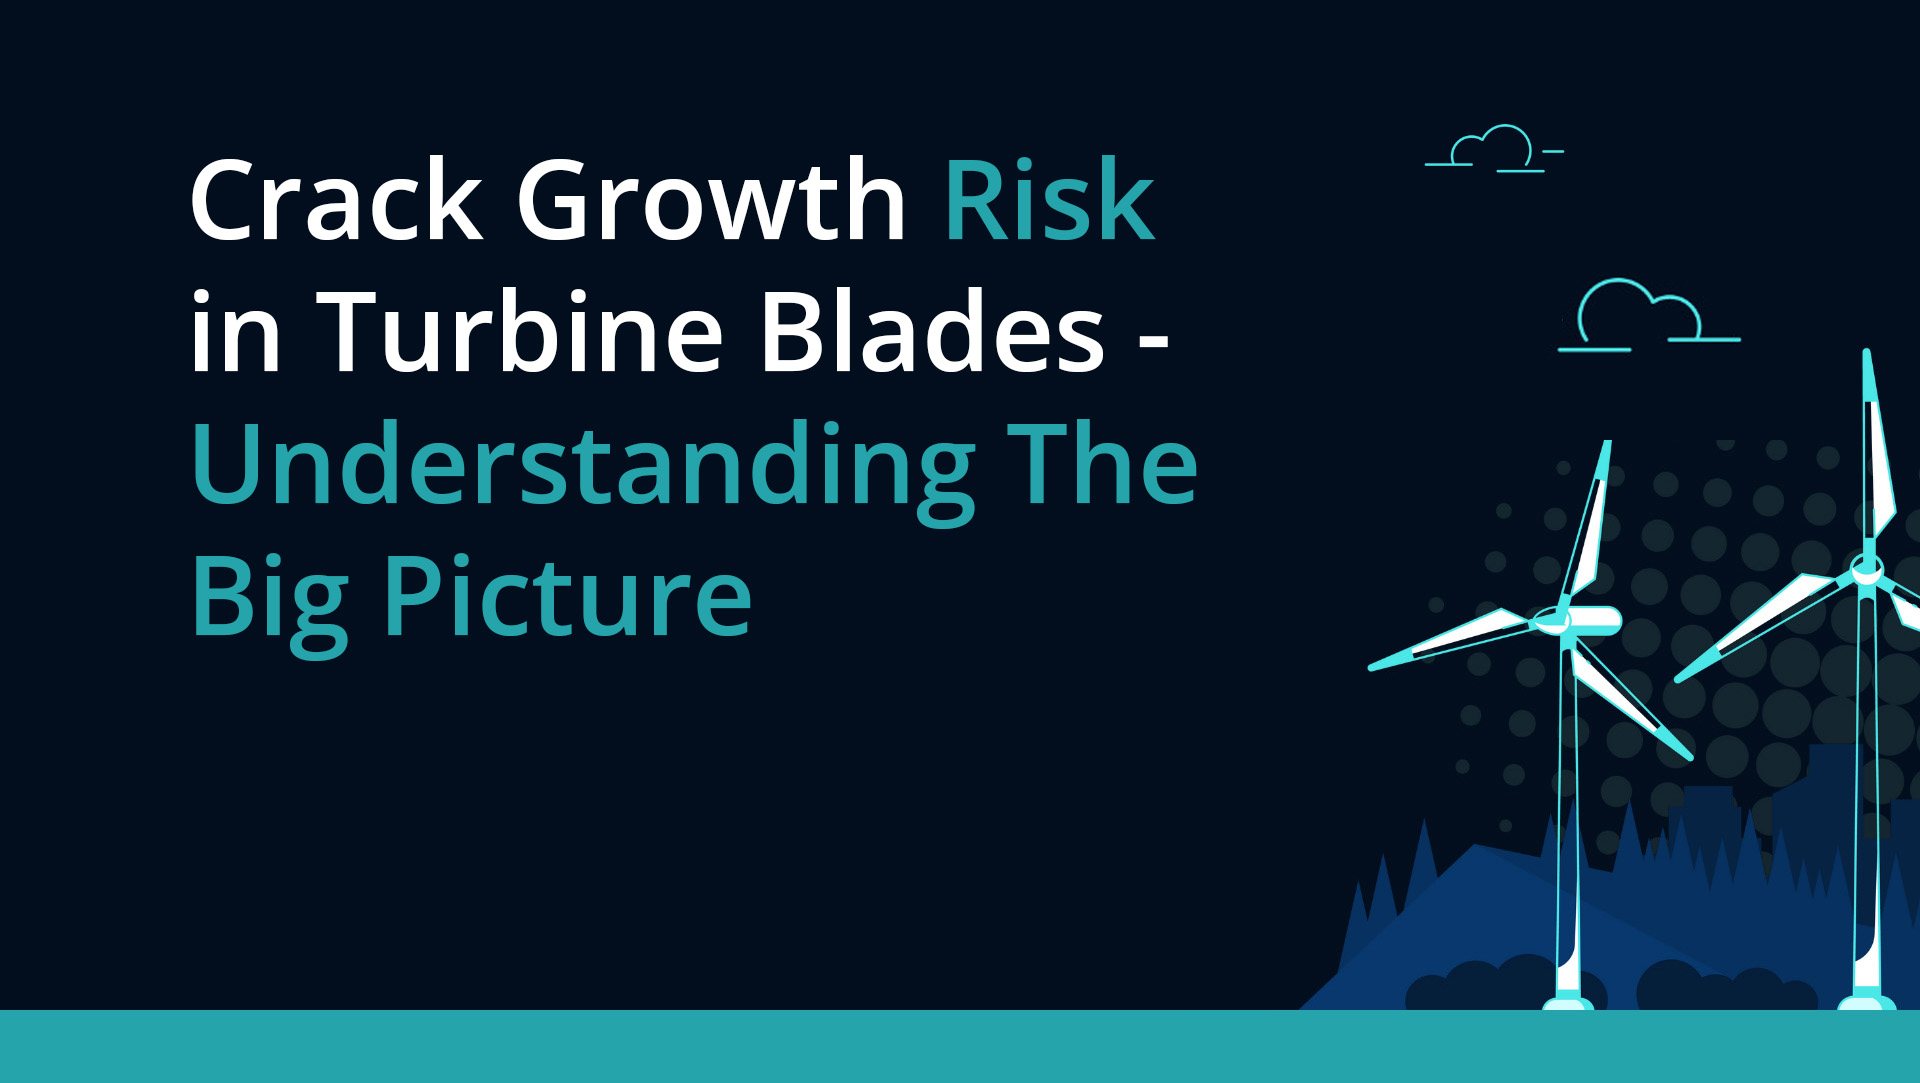 Crack Growth Risk in Turbine Blades - Understanding The Big Picture